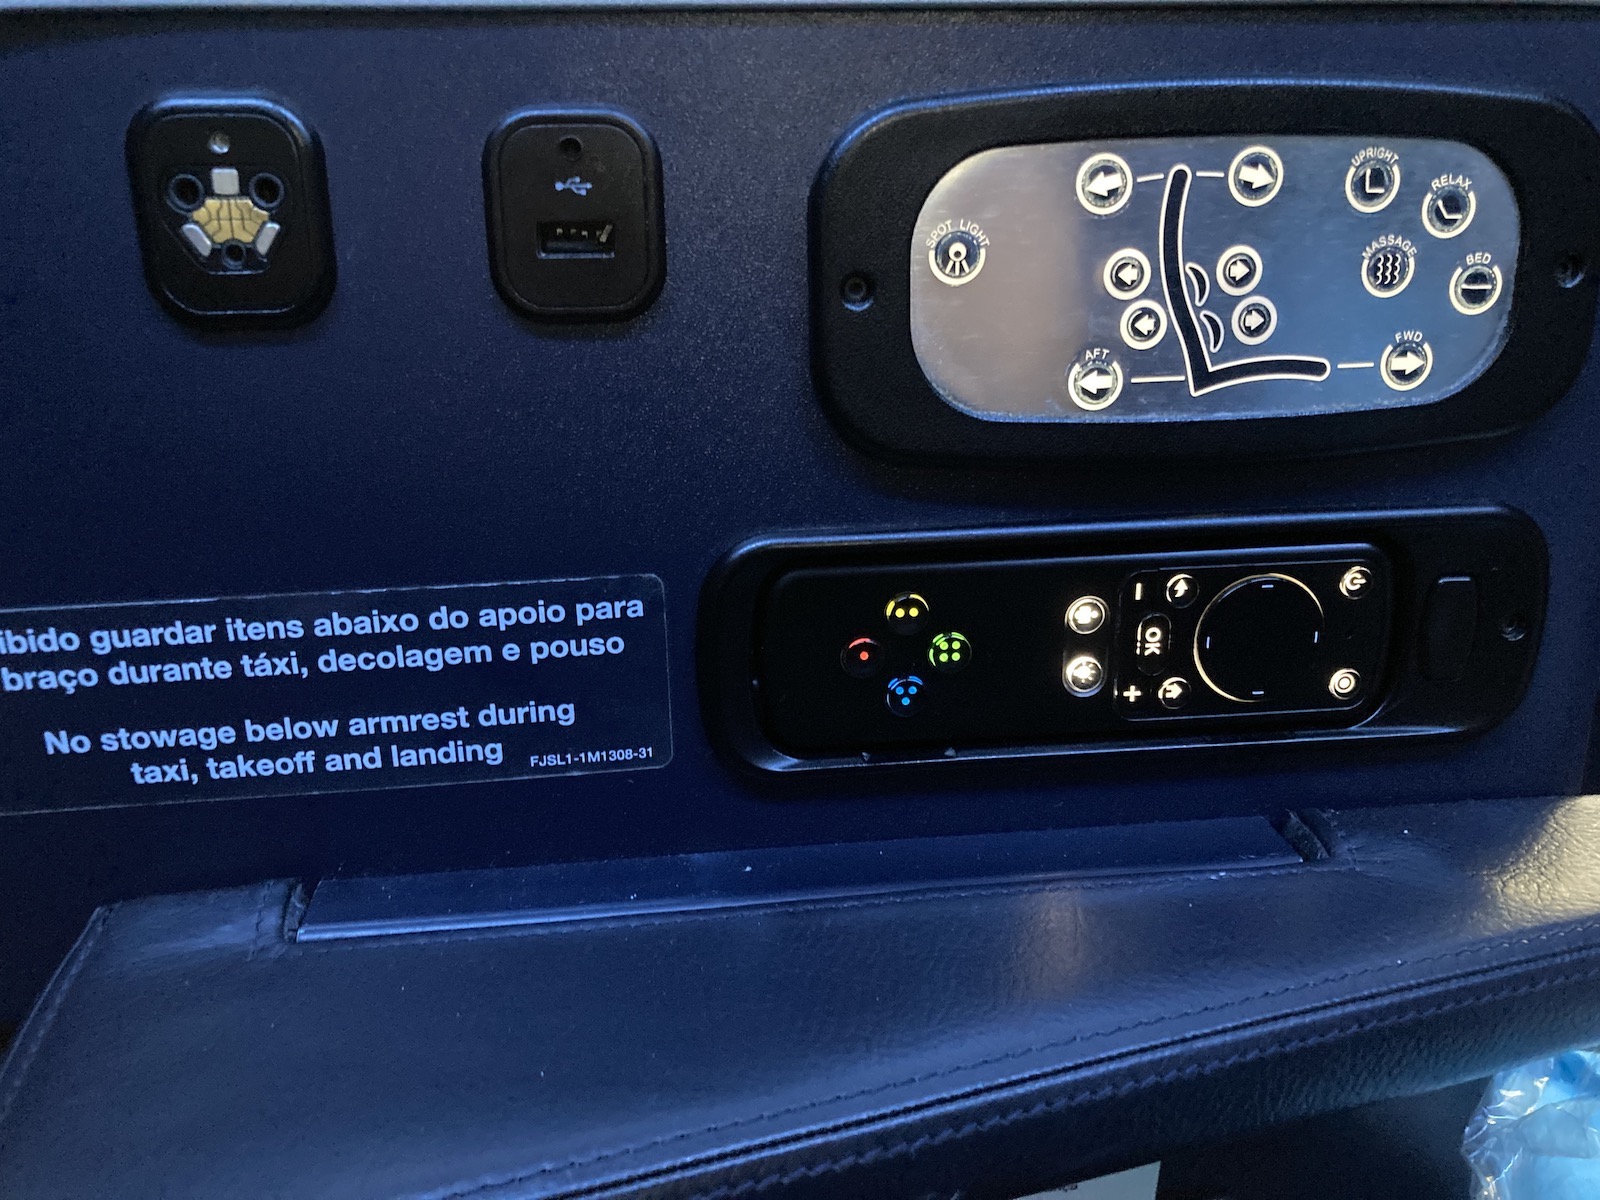 Review Azul A330neo Business Class From FLL to VCP - It Has Potential